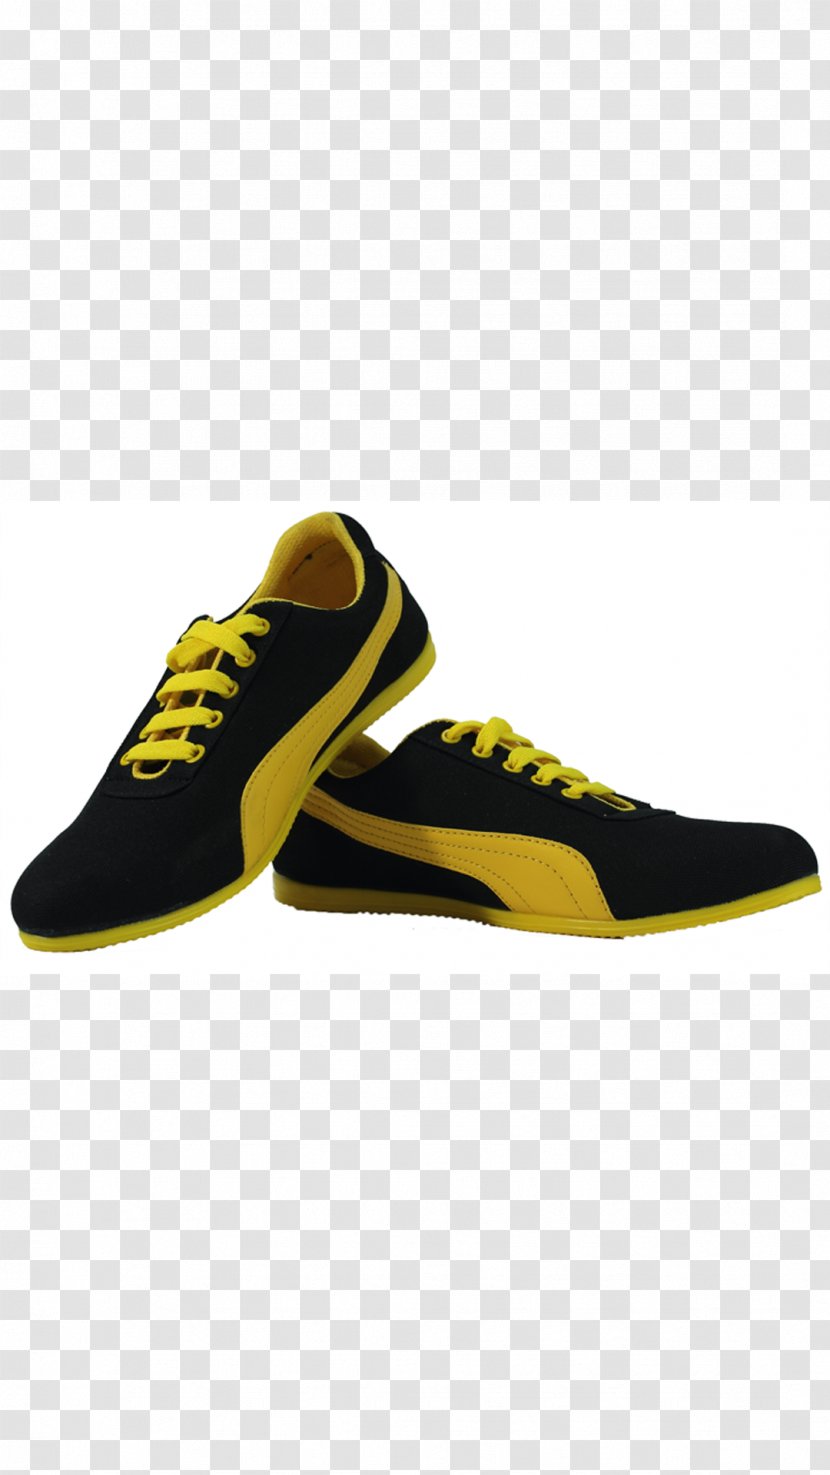 Sneakers Skate Shoe Footwear Sportswear - Yellow - Everyday Casual Shoes Transparent PNG